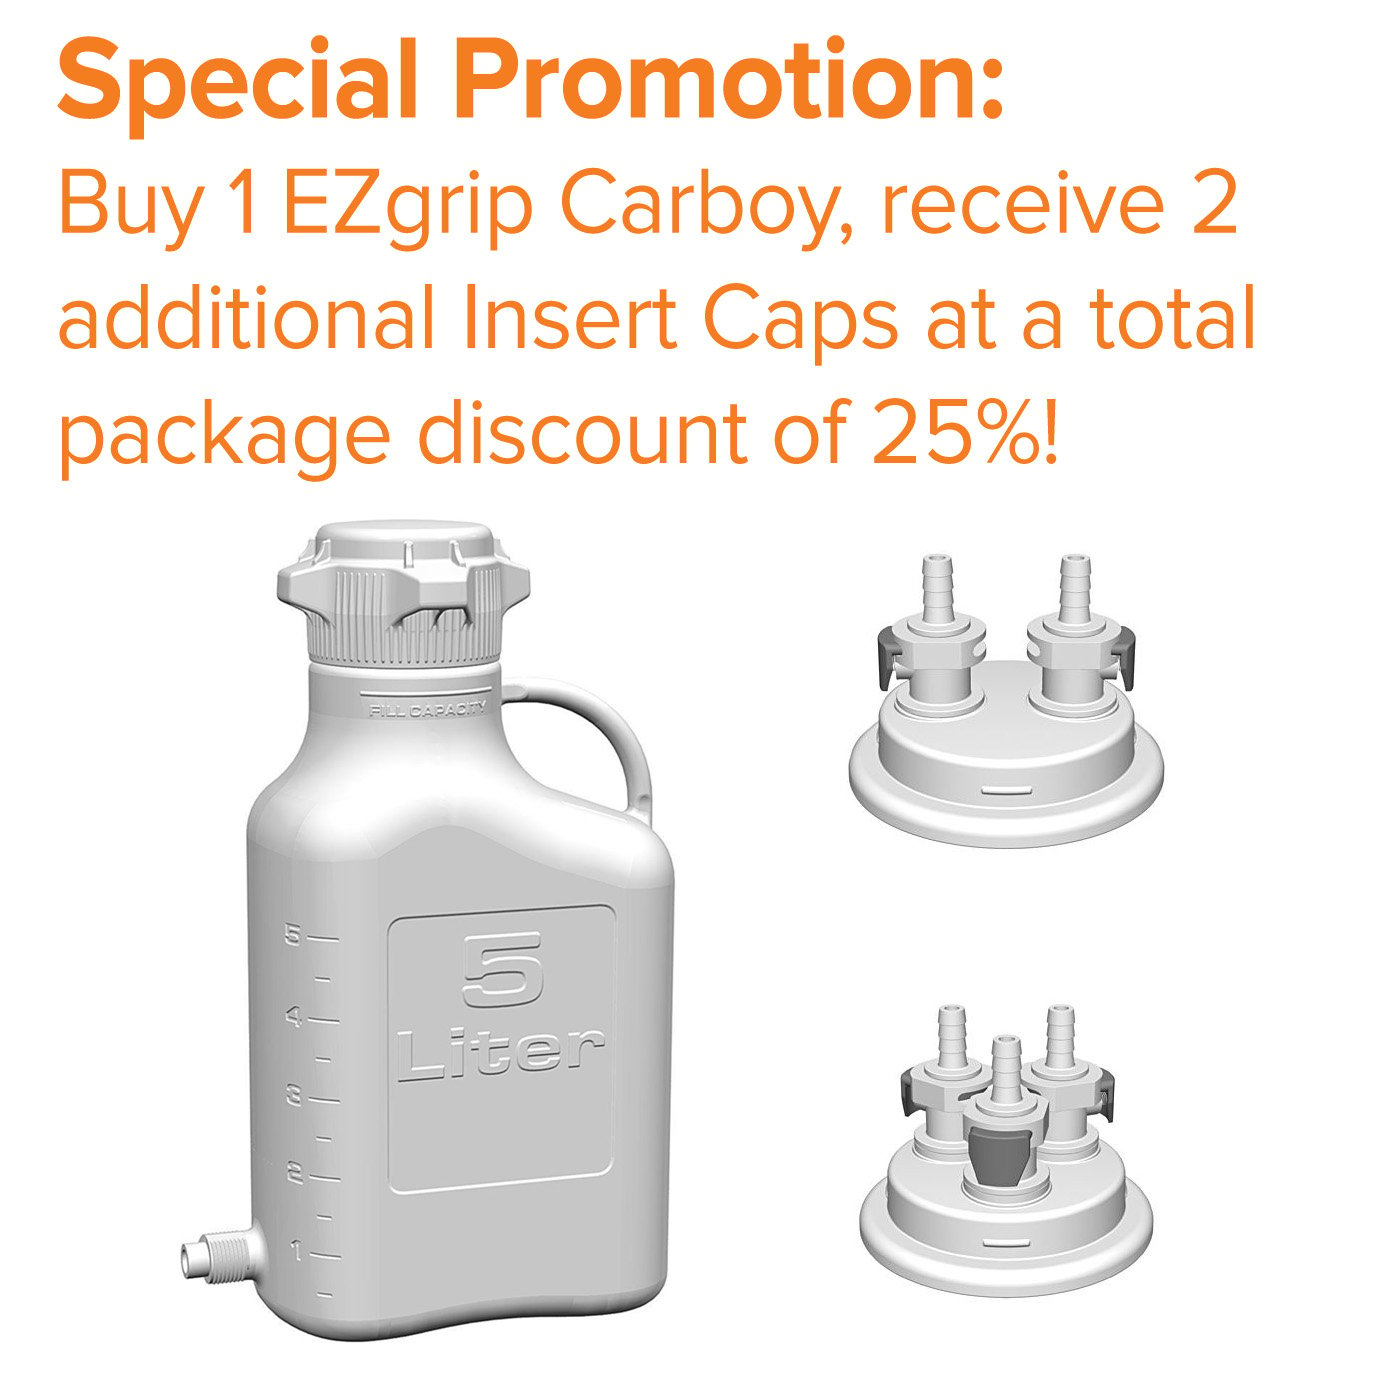 Get a handle on your liquid storage with our Special Carboy Promo!